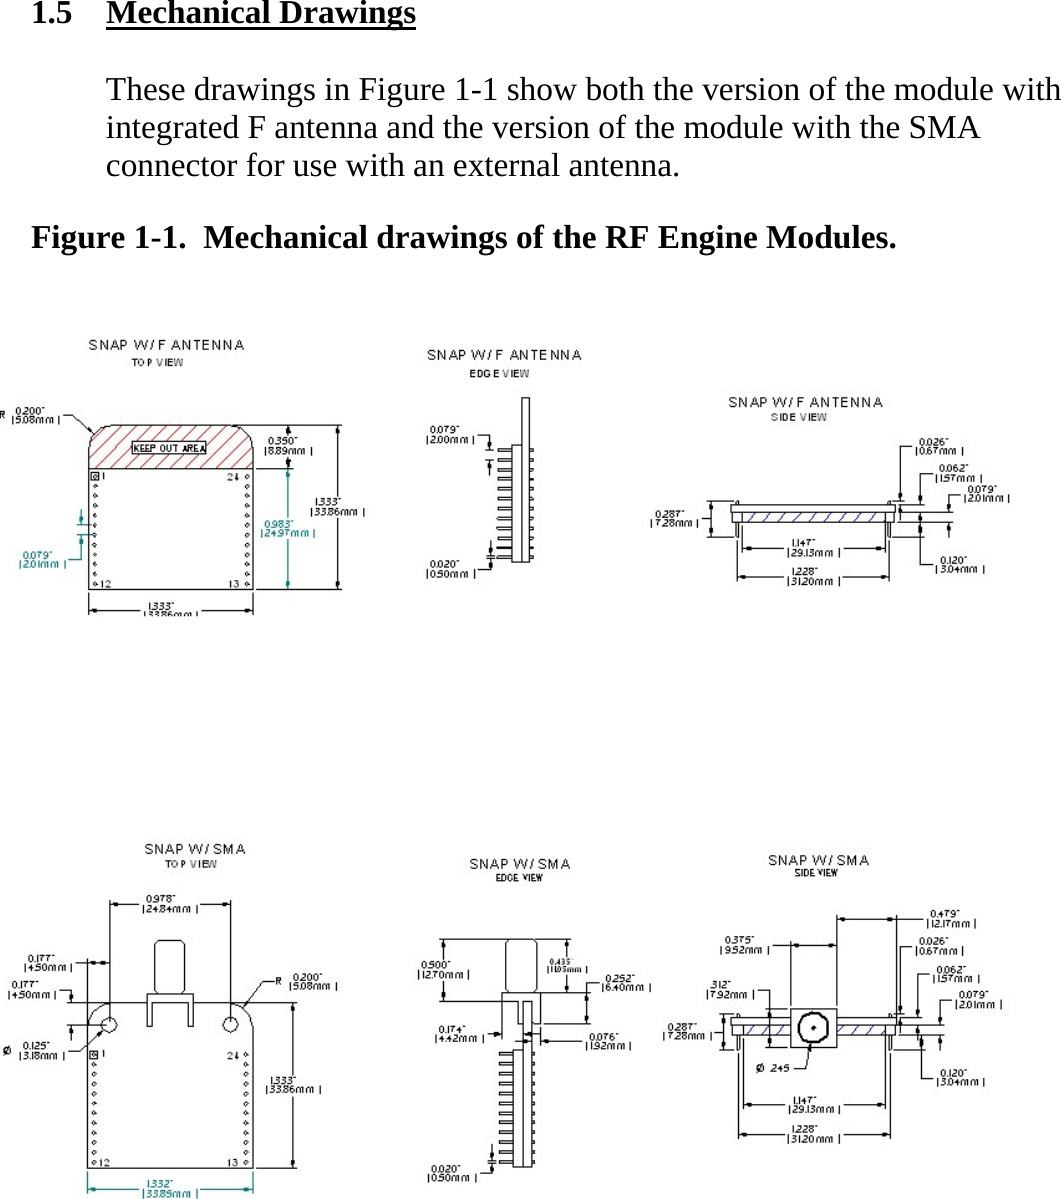   1.5 Mechanical Drawings    These drawings in Figure 1-1 show both the version of the module with integrated F antenna and the version of the module with the SMA connector for use with an external antenna.  Figure 1-1.  Mechanical drawings of the RF Engine Modules.             